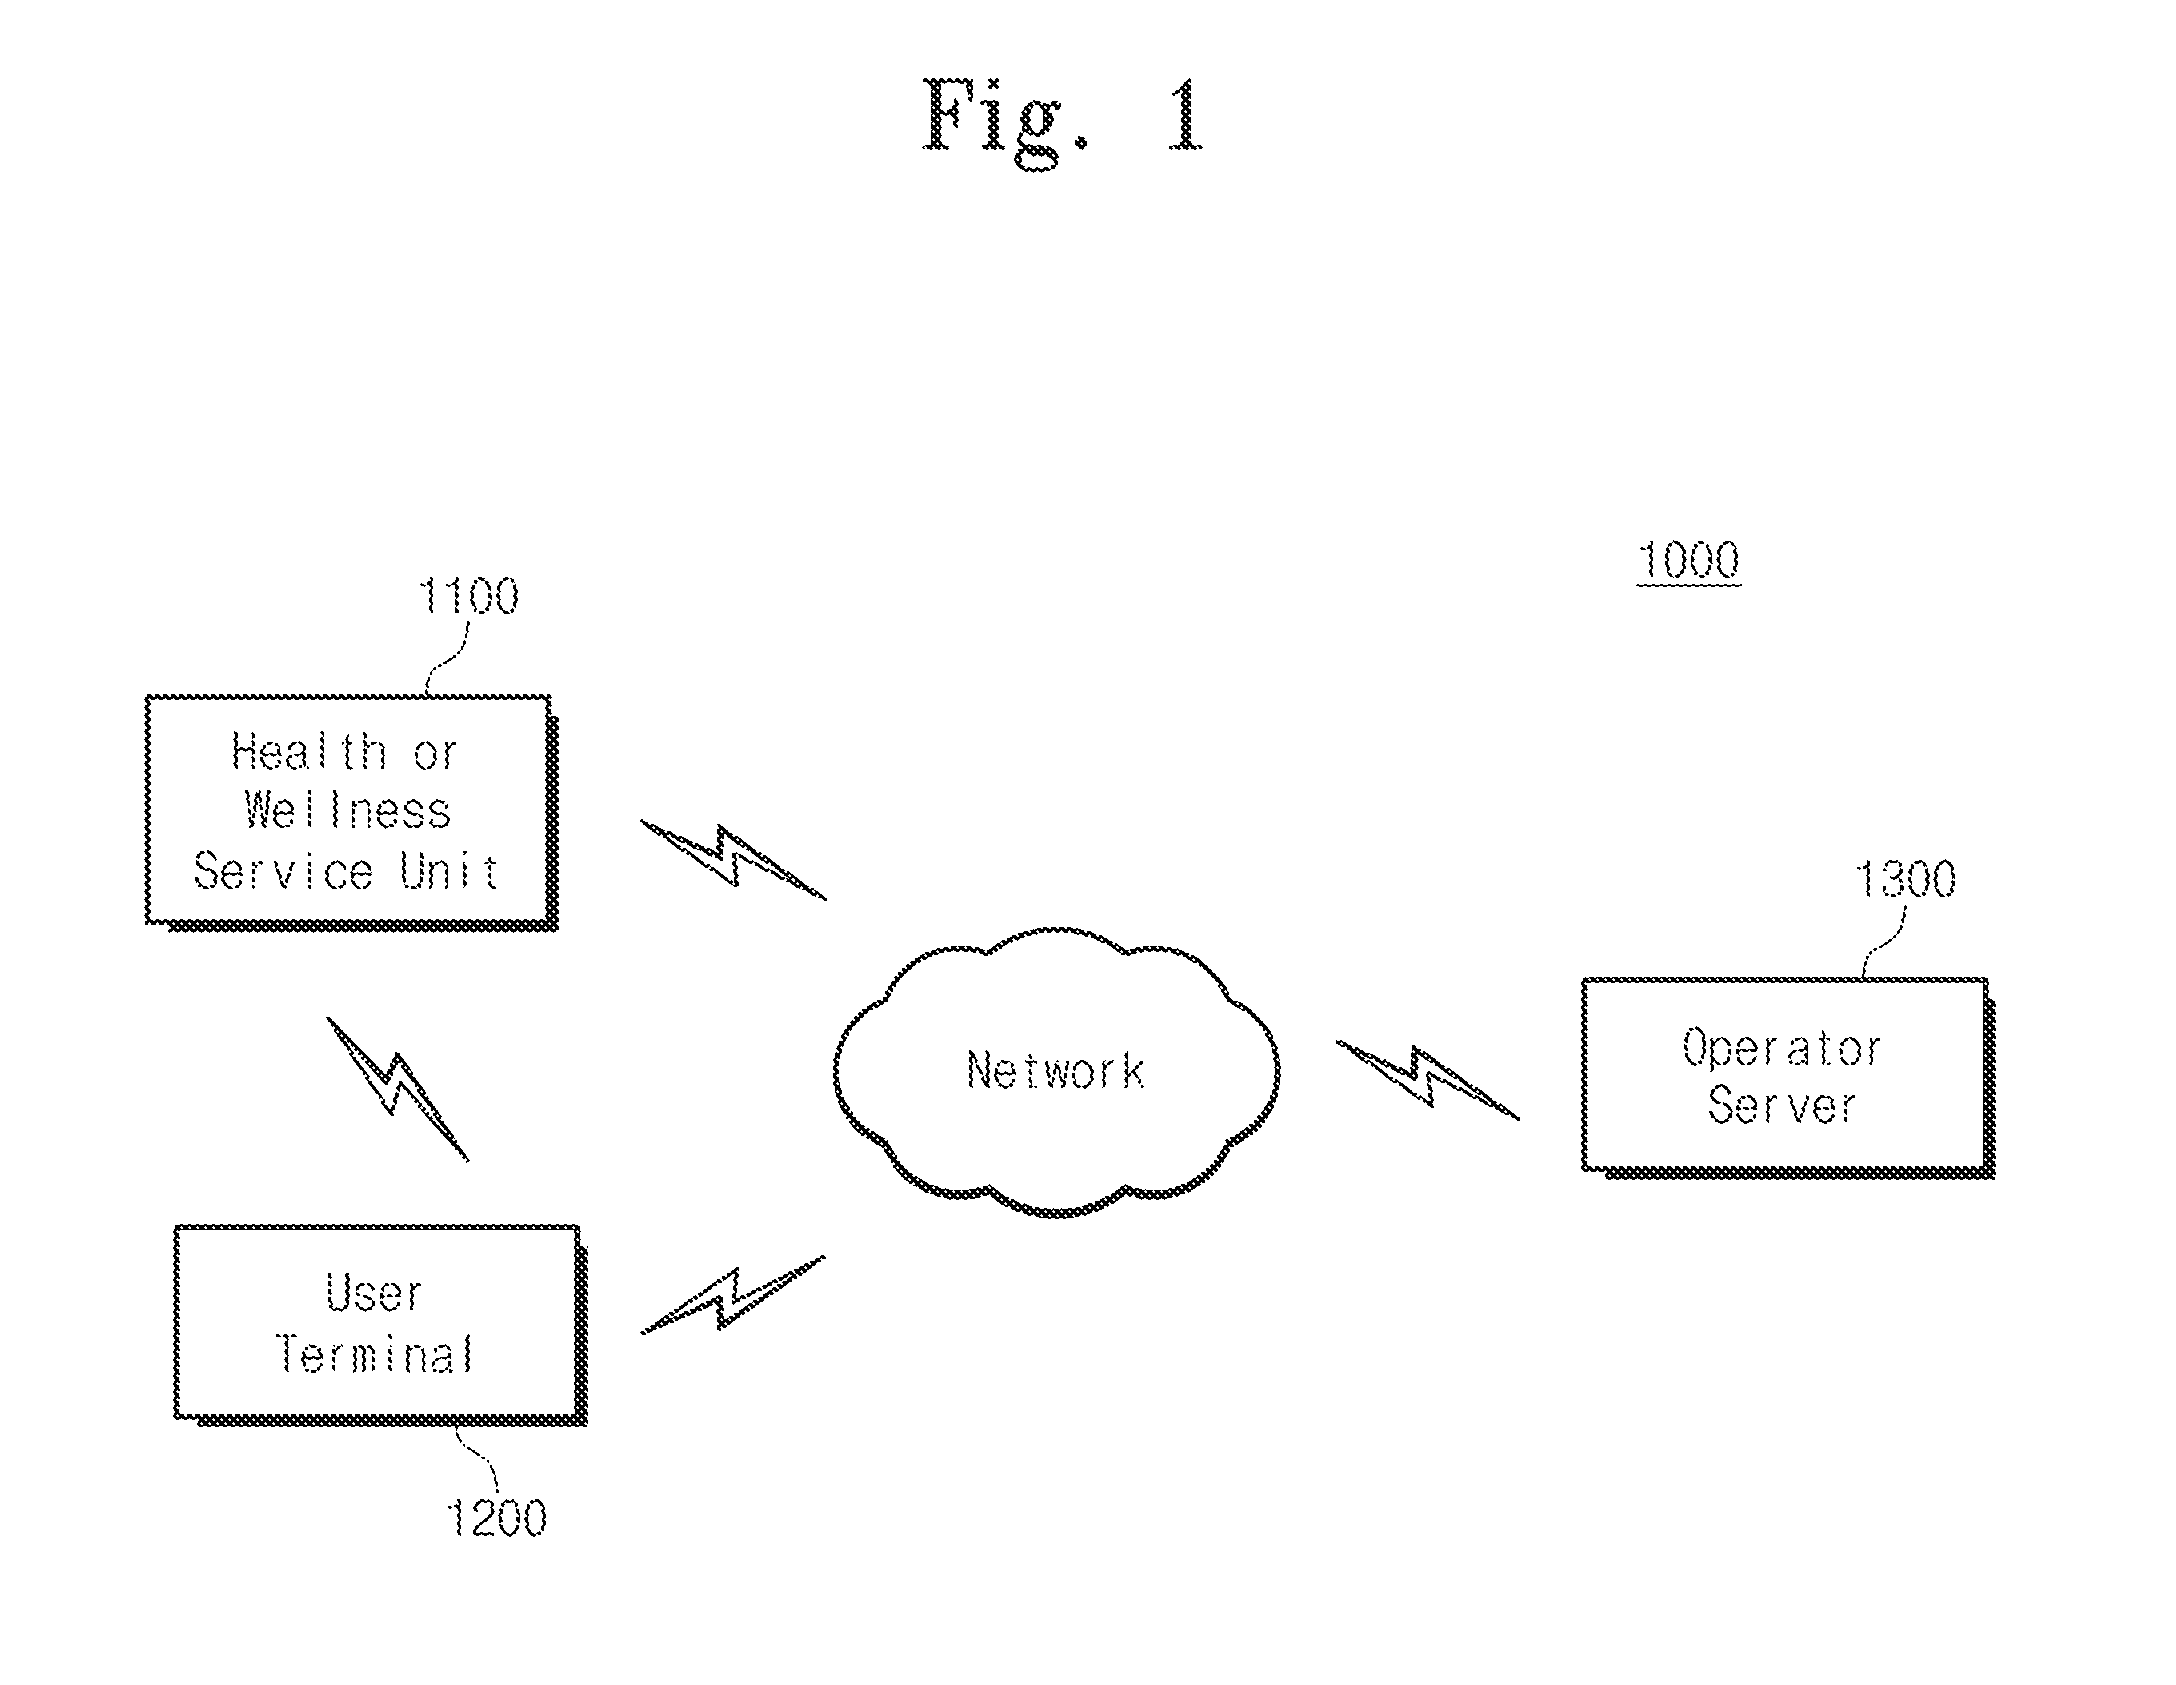 Self-direct m2m (machine-to-machine) comunication based user's daily activity logging and analyzing system with wearable and personal mobile devices